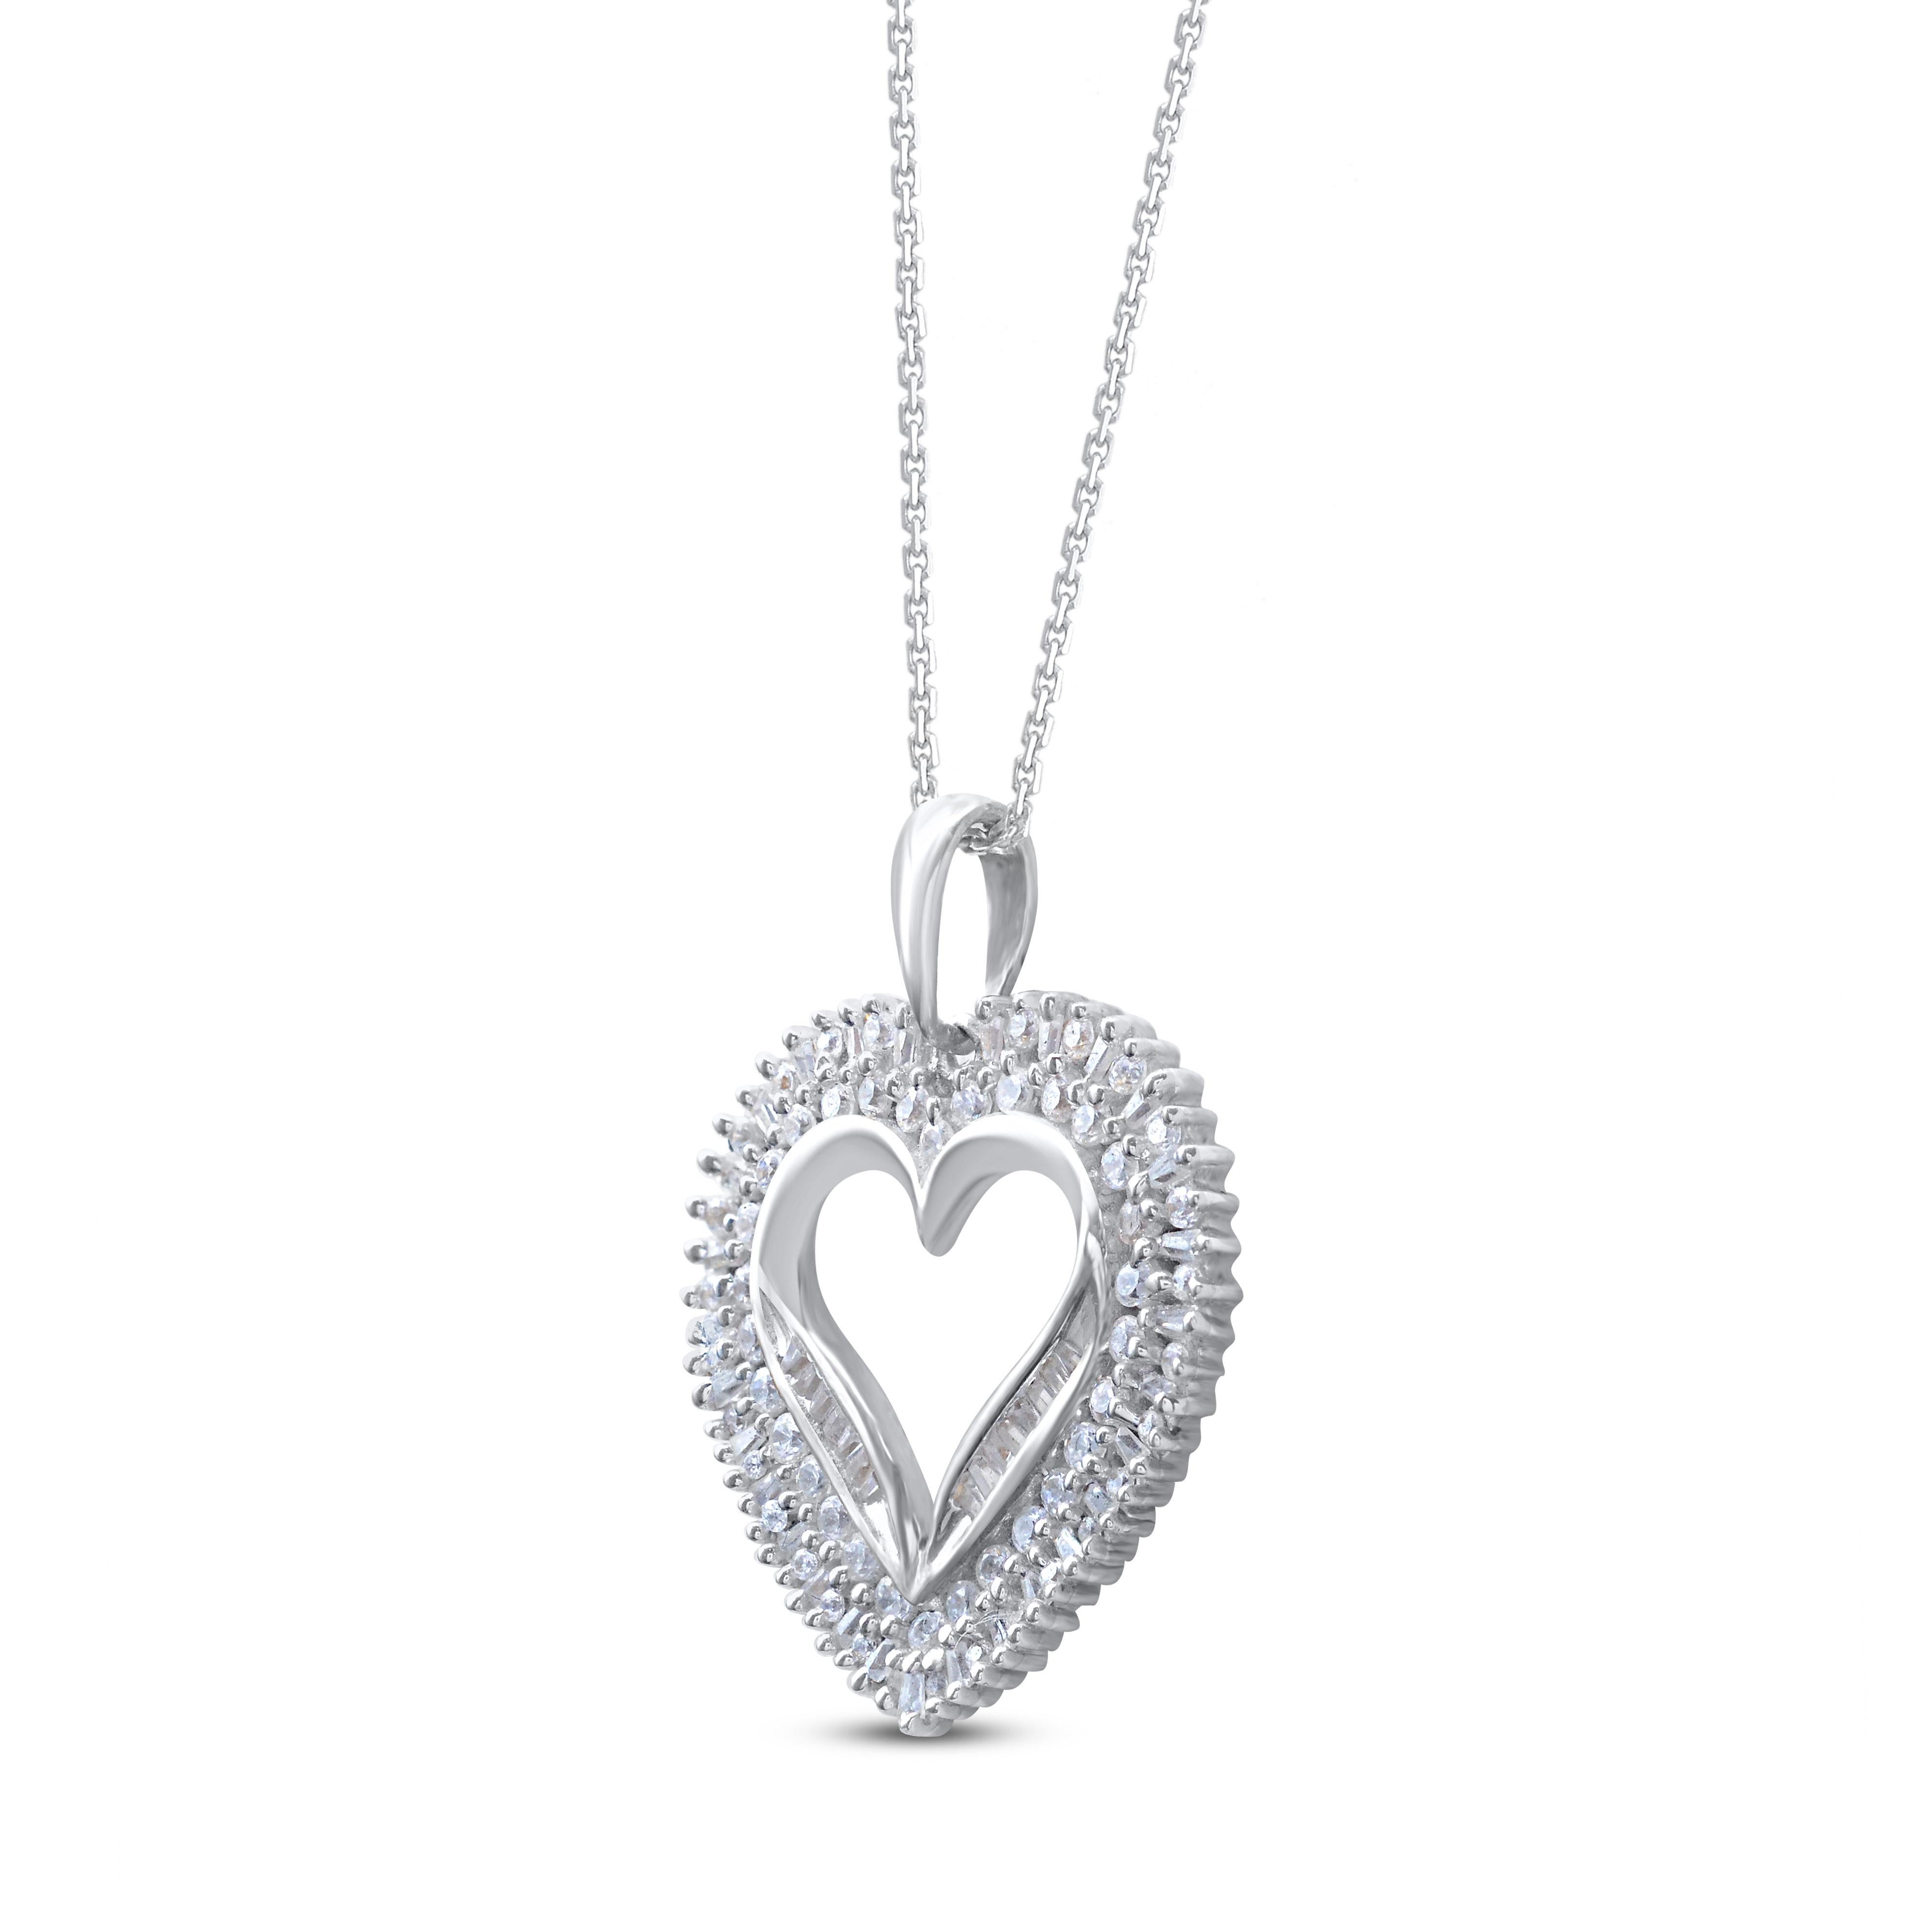 Bring charm to your look with this diamond heart pendant. The pendant is crafted from 14 karat white gold and features 103 round brilliant cut and baguette cut diamond set in half channel, prong & channel setting and a high polish finish complete